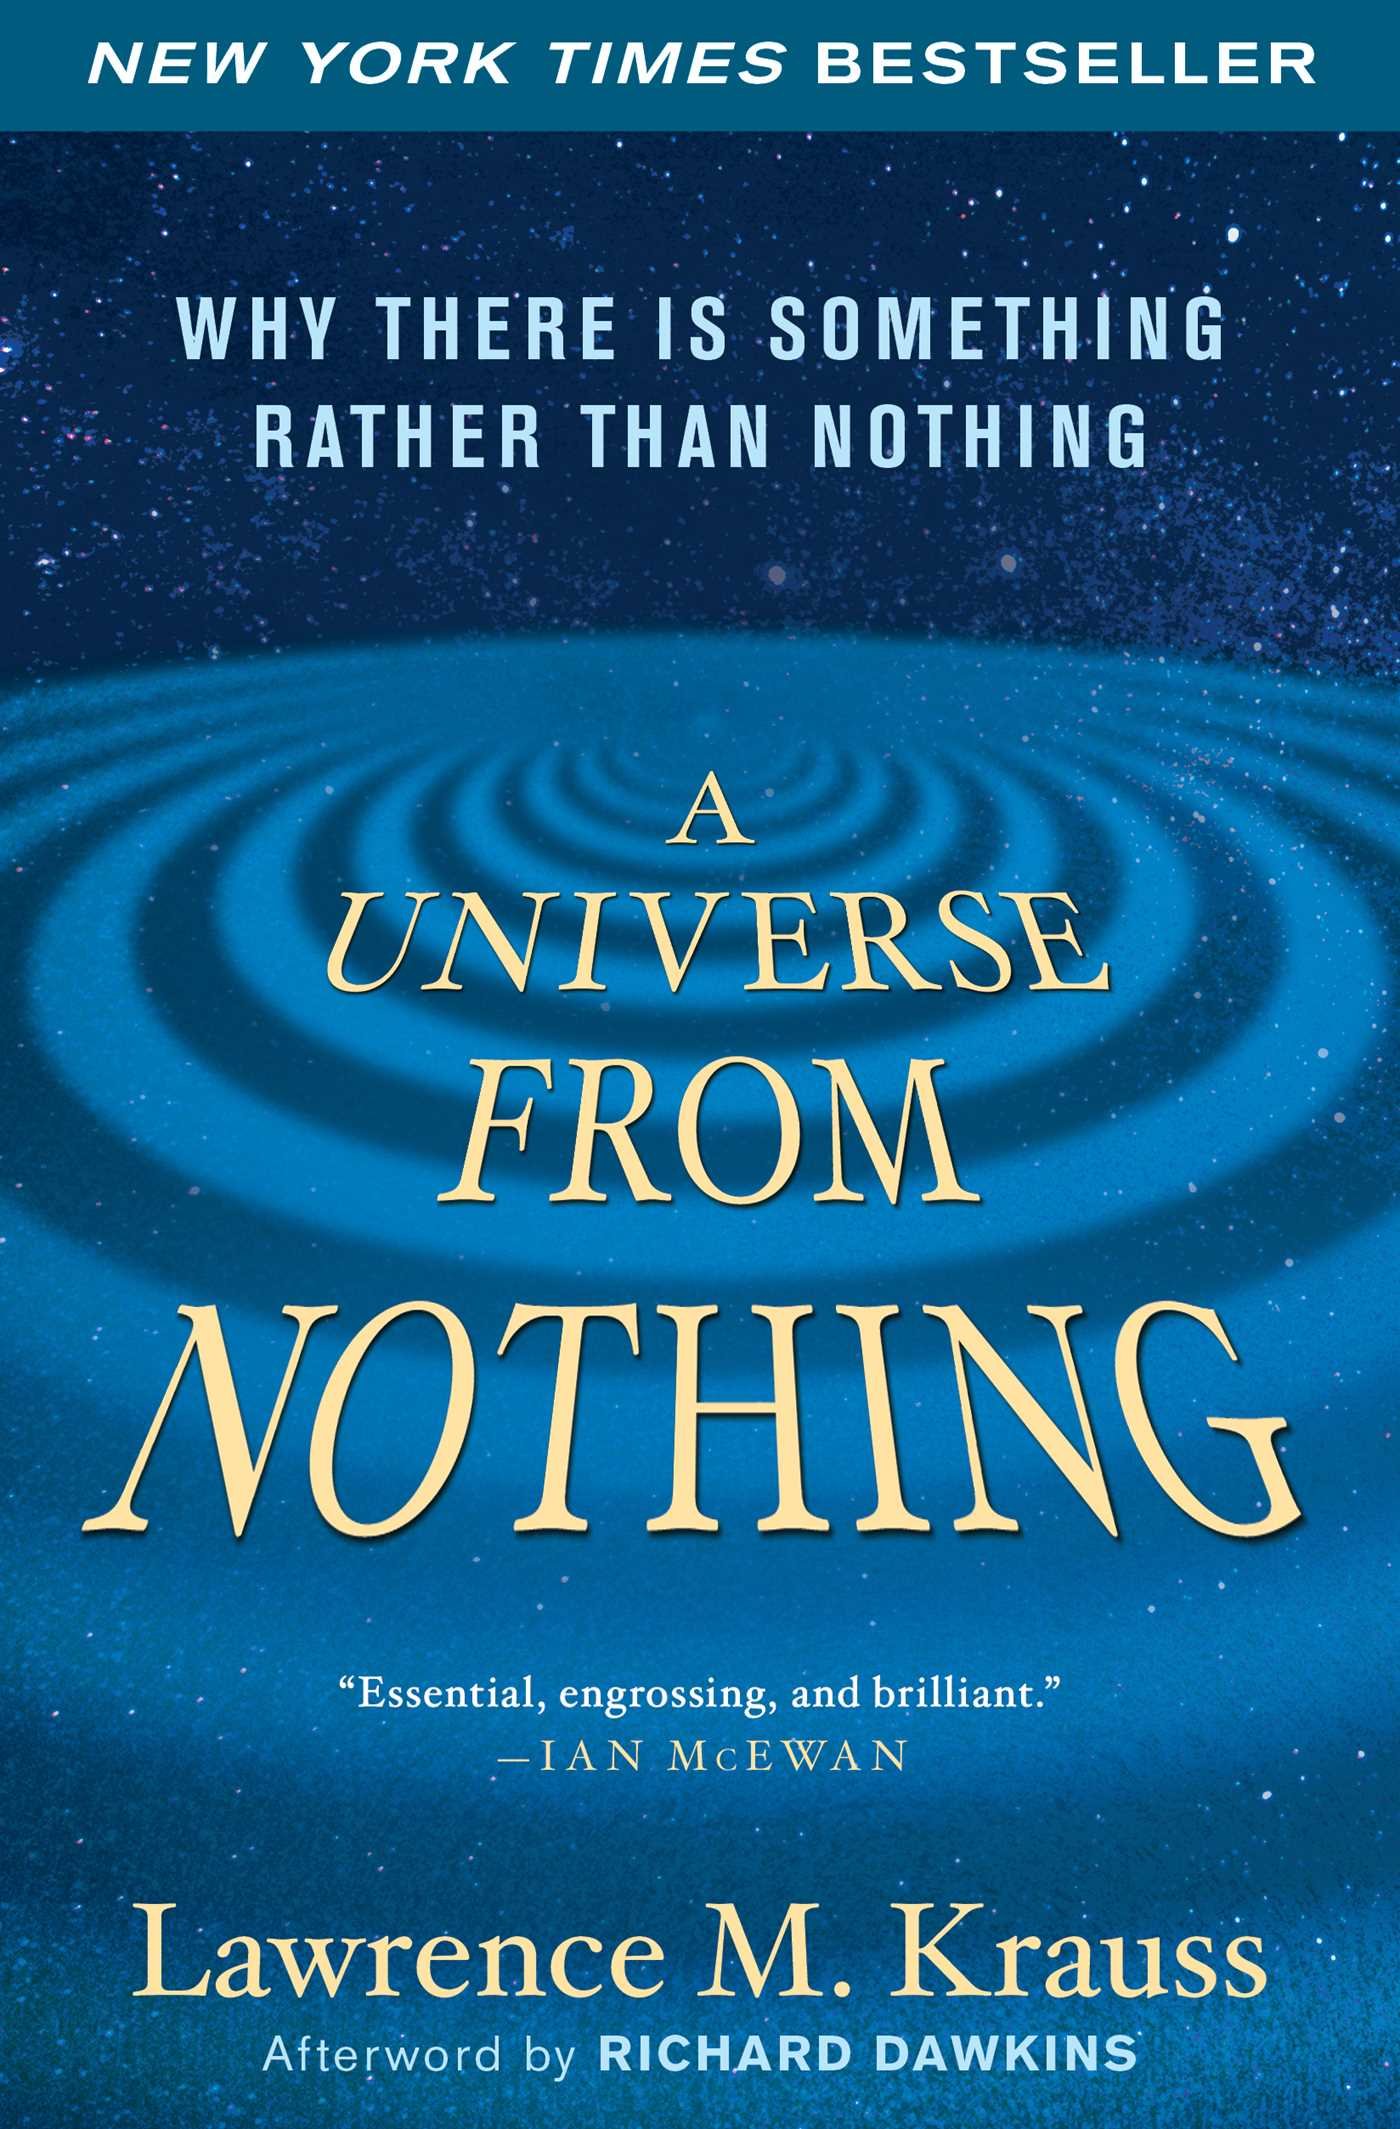 A Universe from Nothing: Why There Is Something Rather than Nothing (Kindle eBook) $2.99